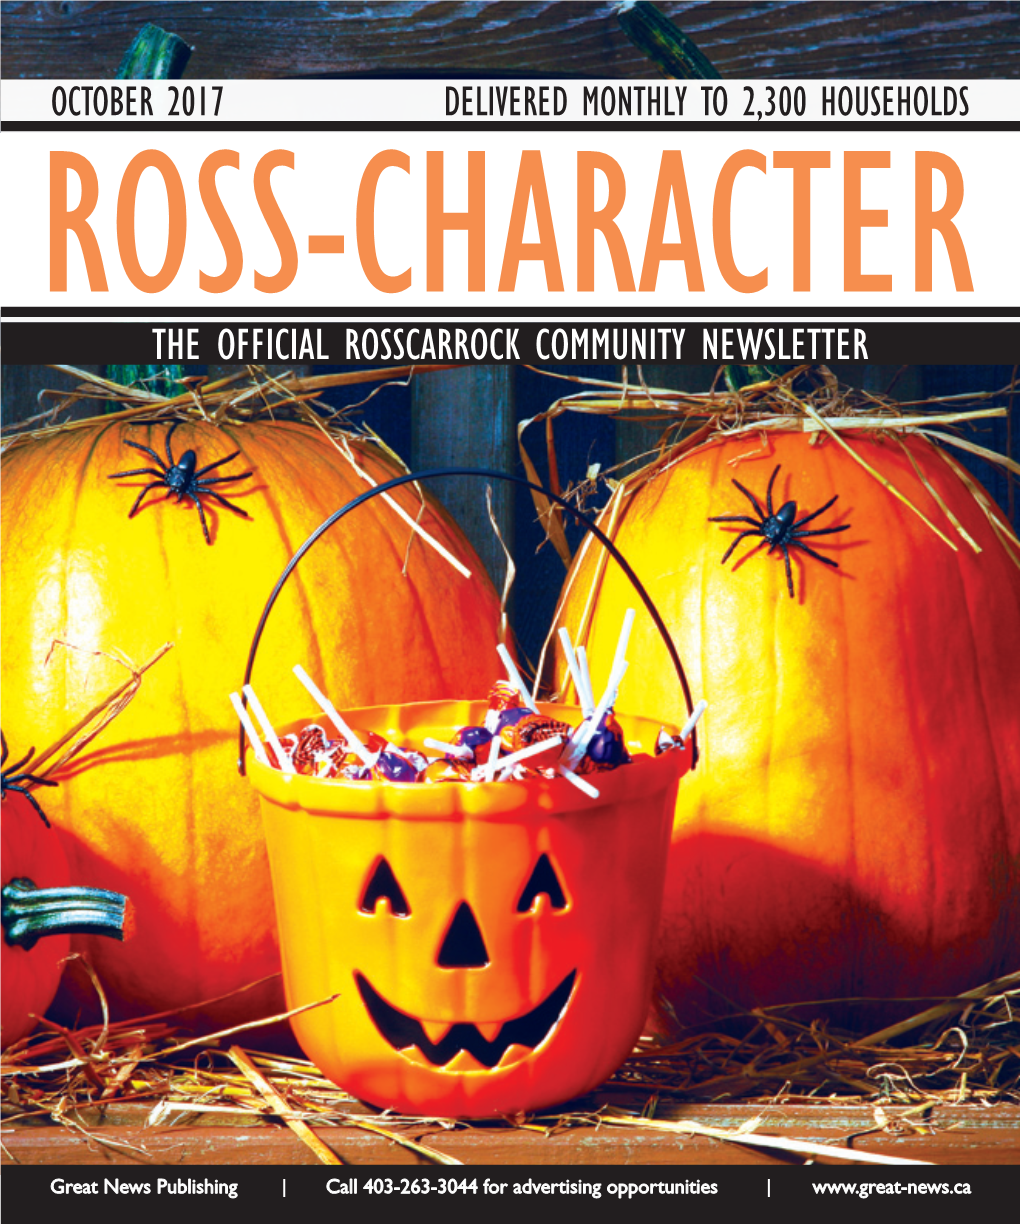 THE OFFICIAL ROSSCARROCK COMMUNITY NEWSLETTER at Amica You Can Always Feel at Home